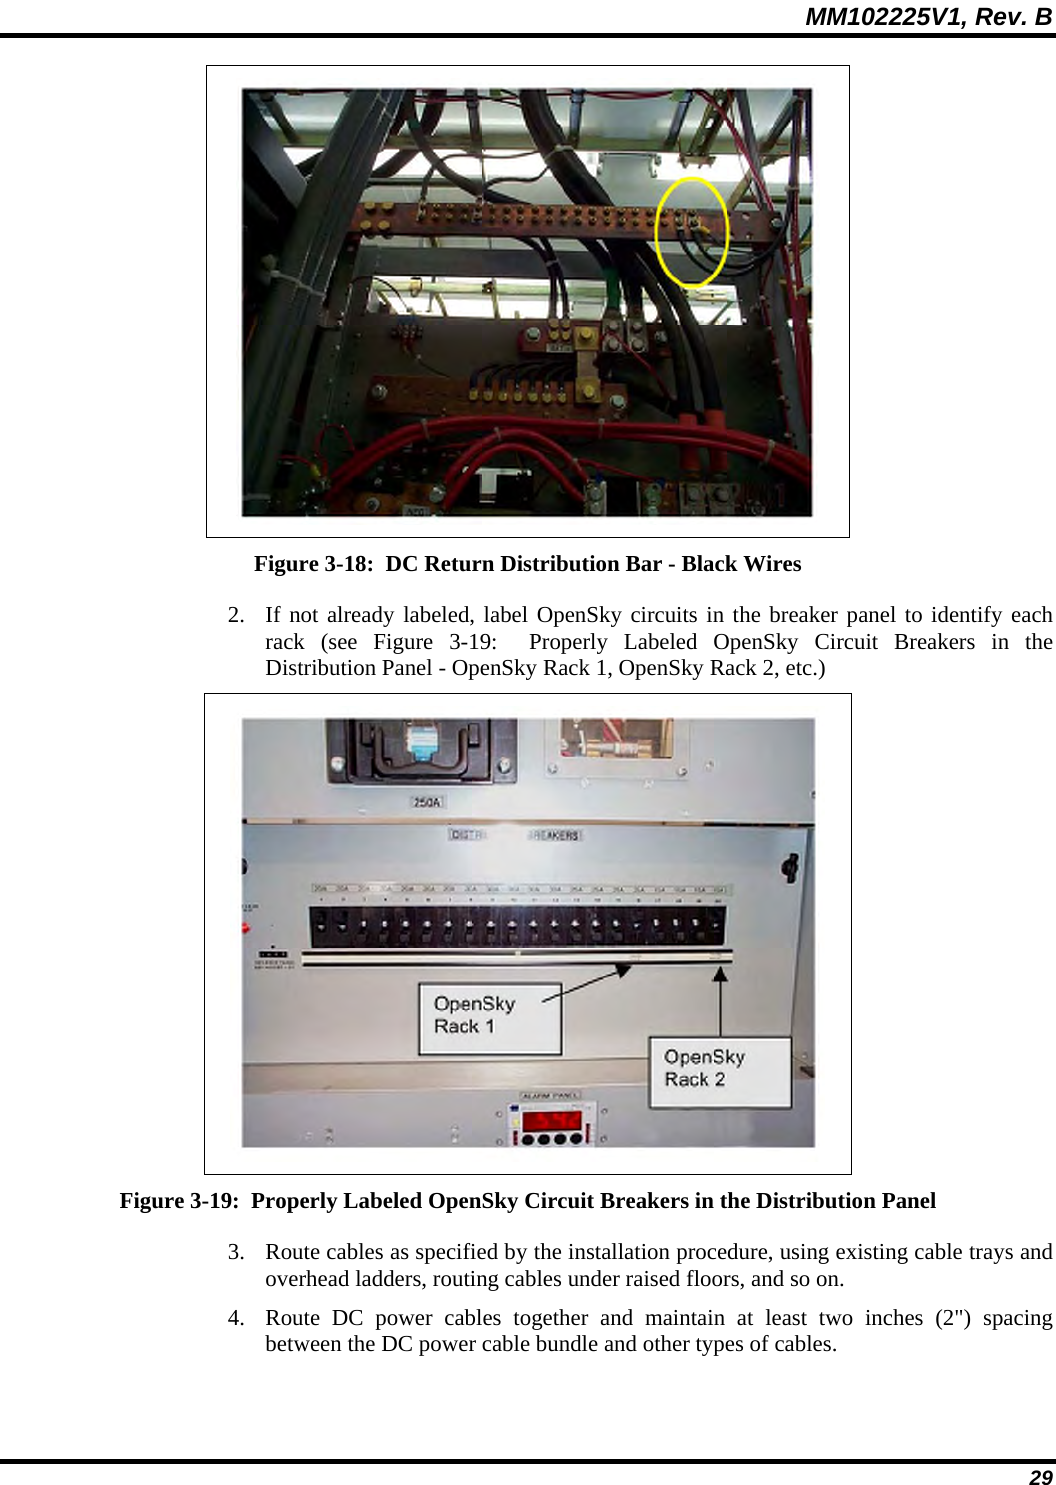 MM102225V1, Rev. B  29  Figure 3-18:  DC Return Distribution Bar - Black Wires 2. If not already labeled, label OpenSky circuits in the breaker panel to identify each rack (see Figure 3-19:  Properly Labeled OpenSky Circuit Breakers in the Distribution Panel - OpenSky Rack 1, OpenSky Rack 2, etc.)  Figure 3-19:  Properly Labeled OpenSky Circuit Breakers in the Distribution Panel 3. Route cables as specified by the installation procedure, using existing cable trays and overhead ladders, routing cables under raised floors, and so on. 4. Route DC power cables together and maintain at least two inches (2&quot;) spacing between the DC power cable bundle and other types of cables. 